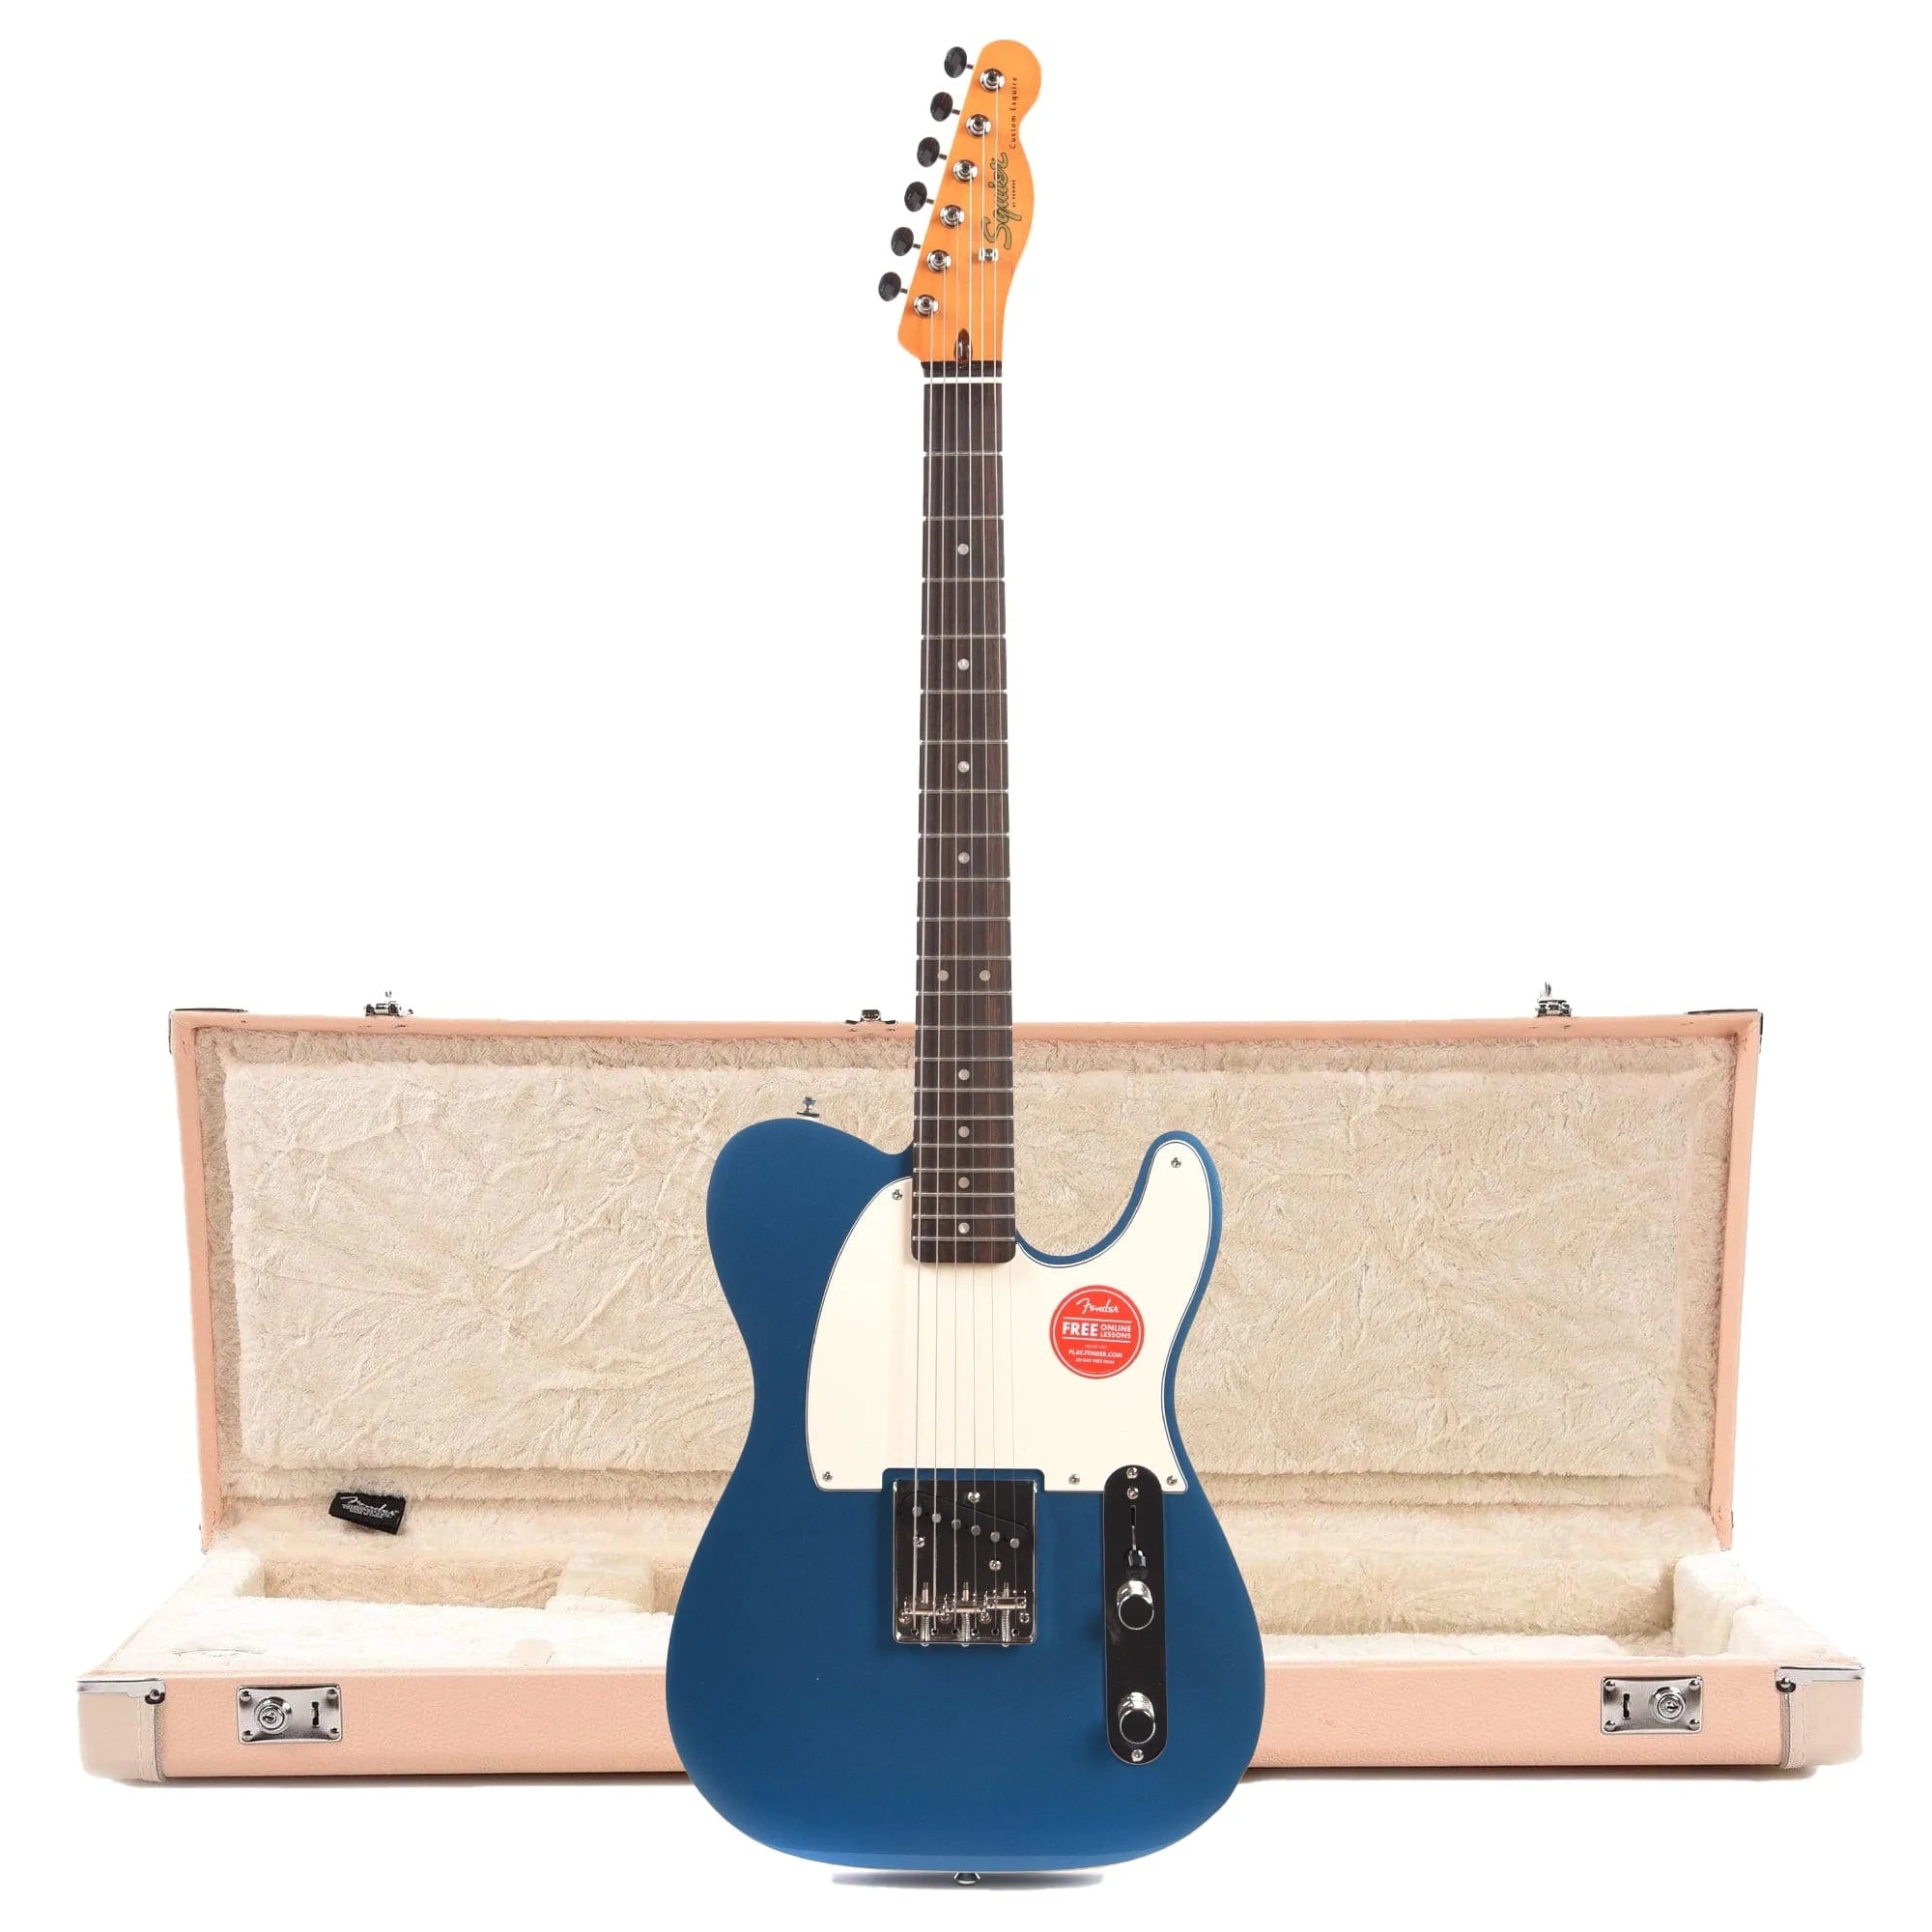 Squier Classic Vibe '60s Custom Esquire Lake Placid Blue w/3-Ply Parchment Pickguard (CME Exclusive) and Hardshell Case Strat/Tele Shell Pink w/Cream Interior (CME Exclusive) Electric Guitars / Solid Body